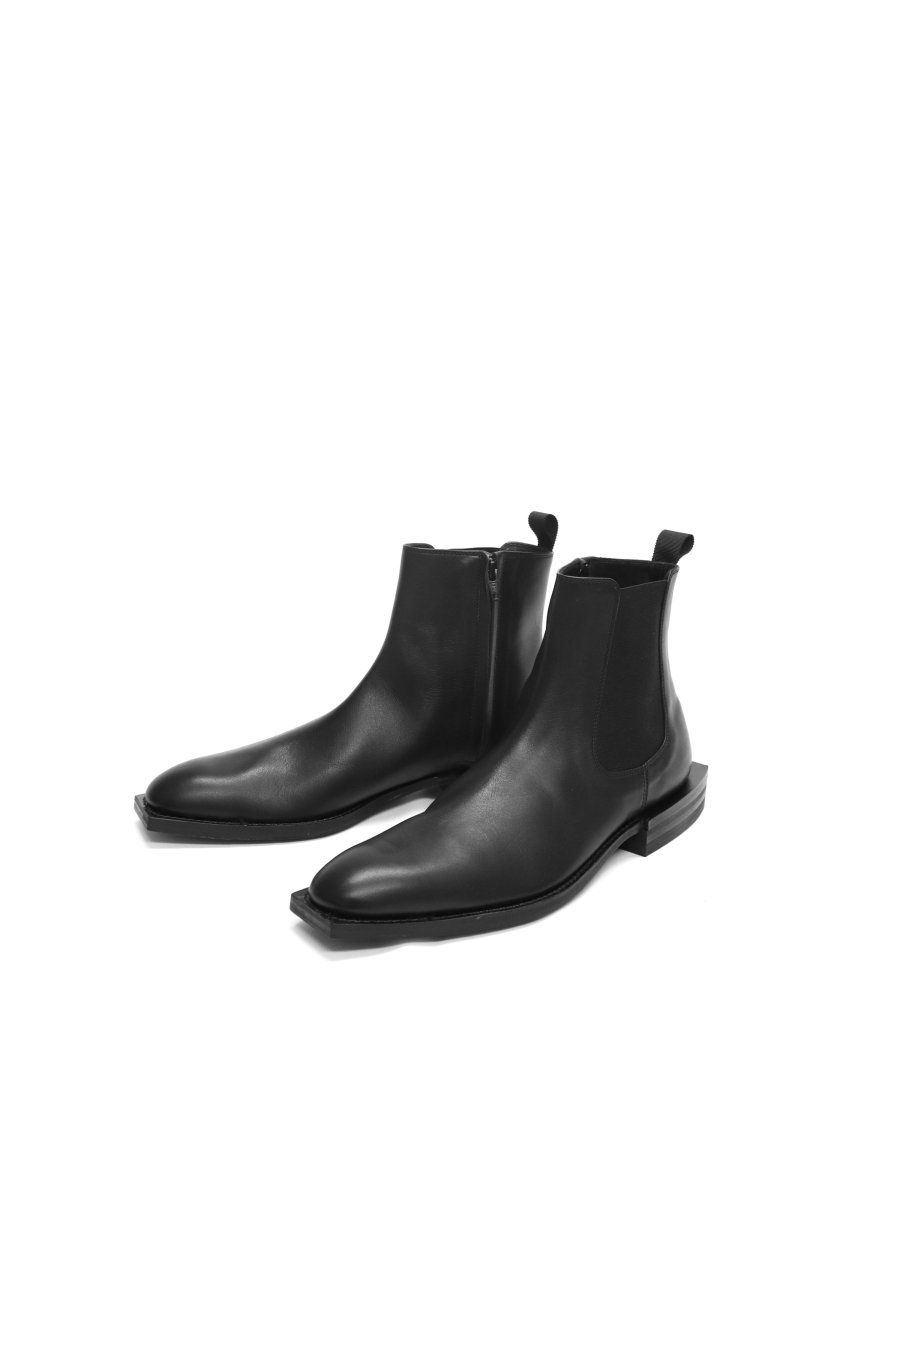 LITTLEBIG   Leather Boots<img class='new_mark_img2' src='https://img.shop-pro.jp/img/new/icons15.gif' style='border:none;display:inline;margin:0px;padding:0px;width:auto;' />